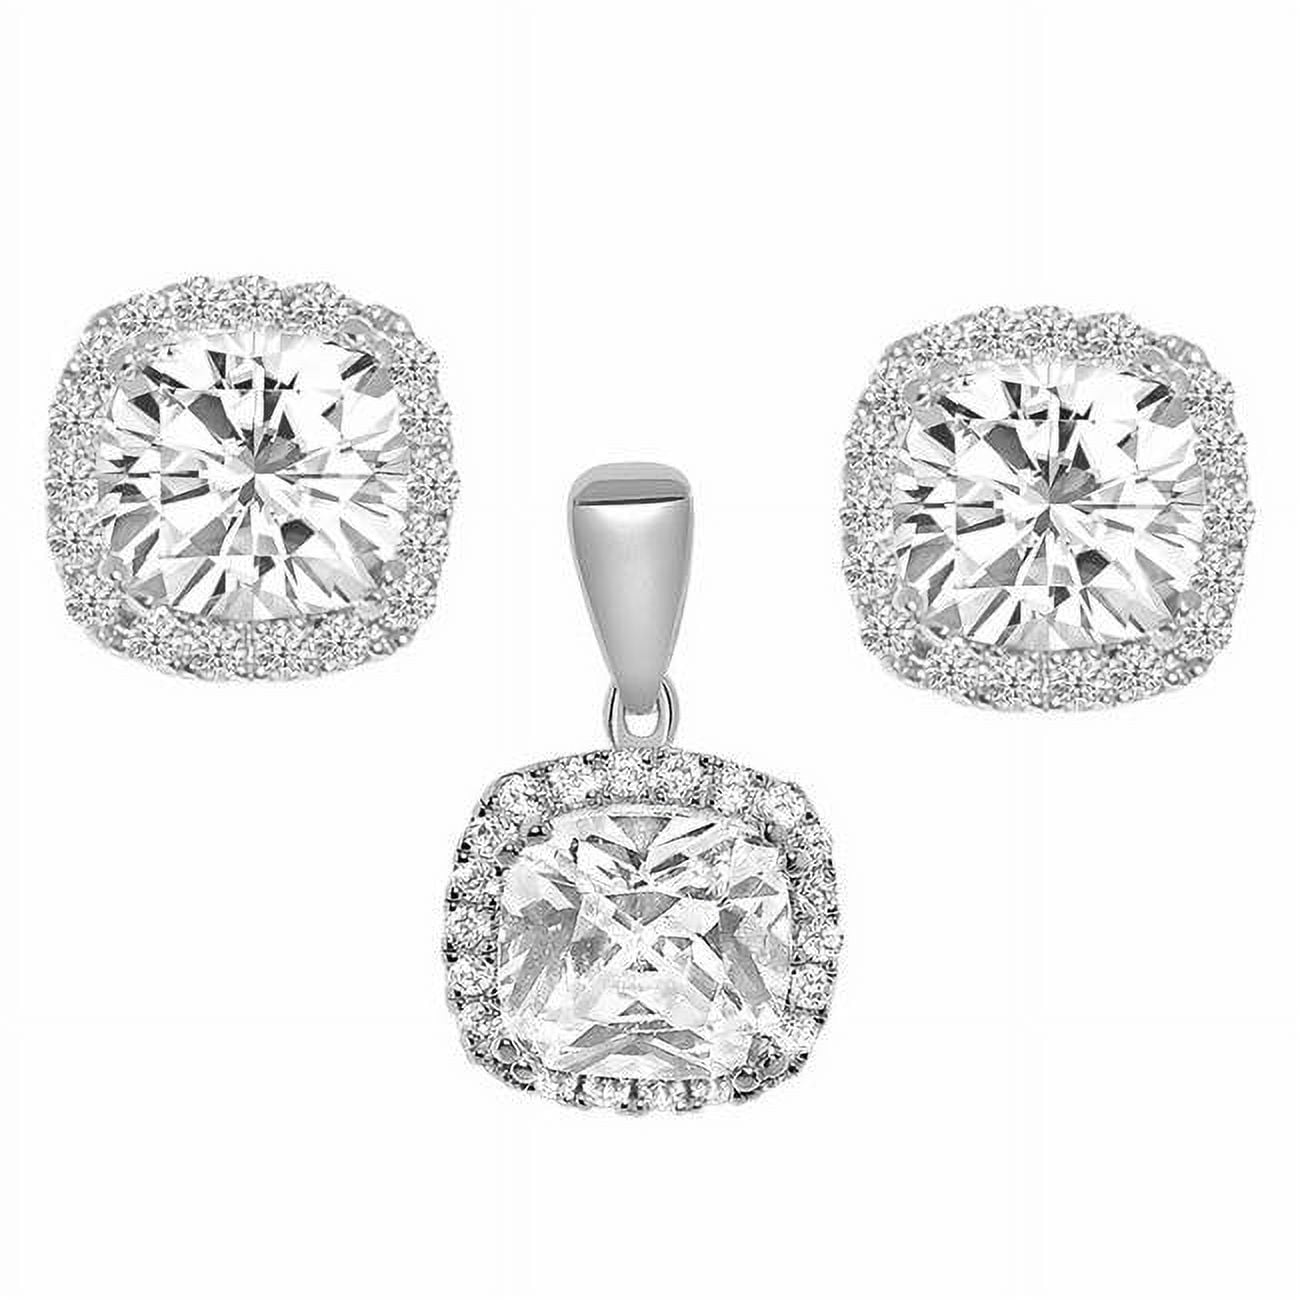 Picture of Precious Stars EP1694-2489 14K White Gold Cushion-Cut Cubic Zirconia Halo Earring Pendant Set